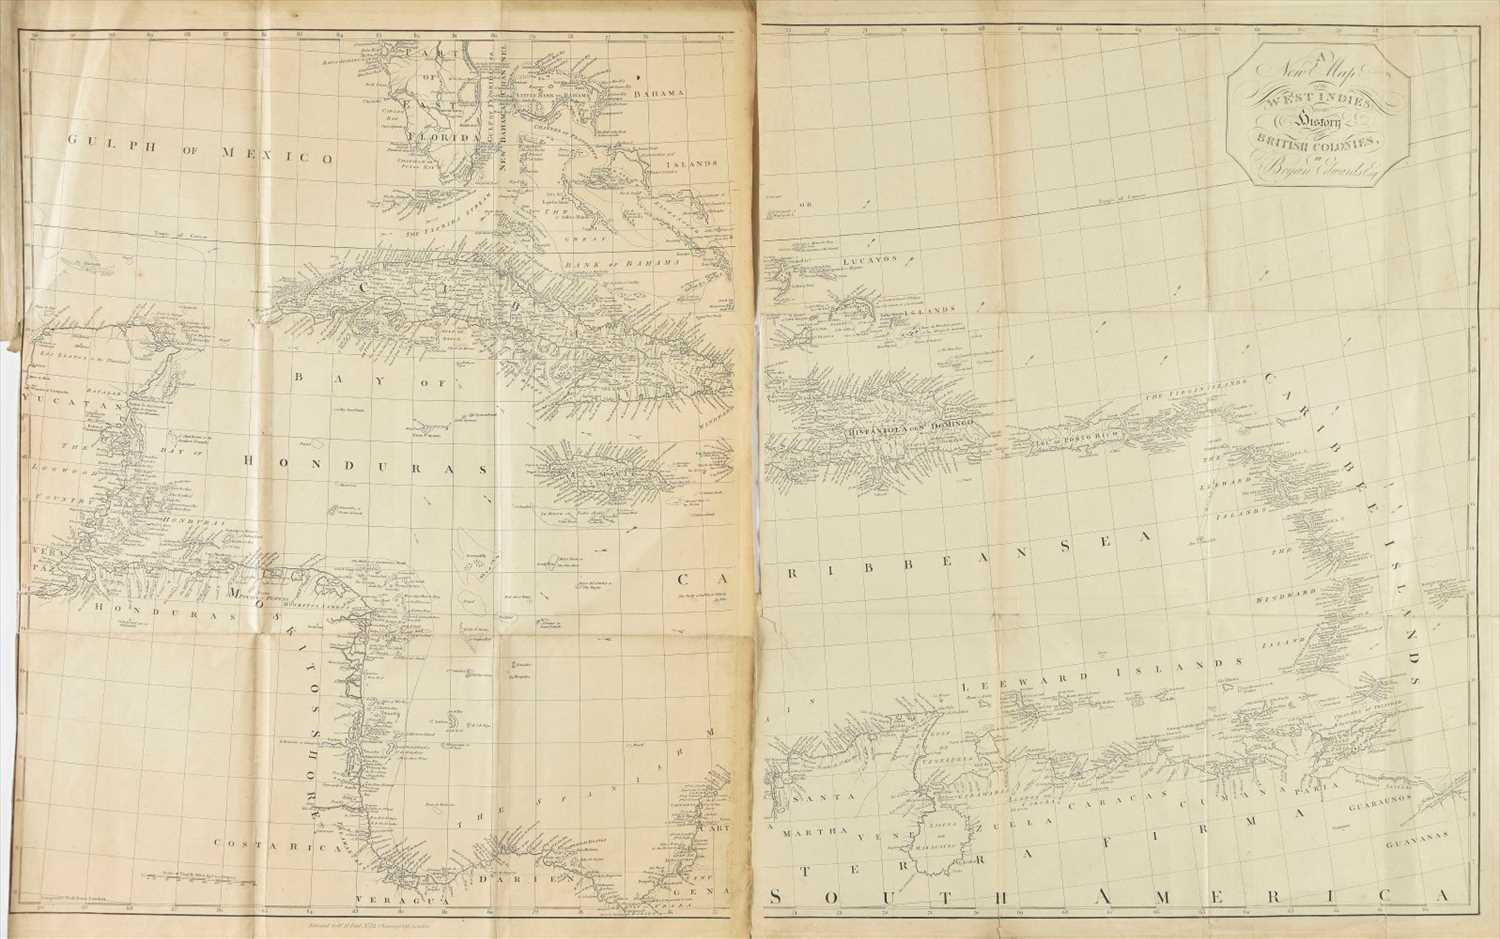 Lot 85 - West Indies. (Edwards Bryan), A new Map of the West Indies..., 1794 or later